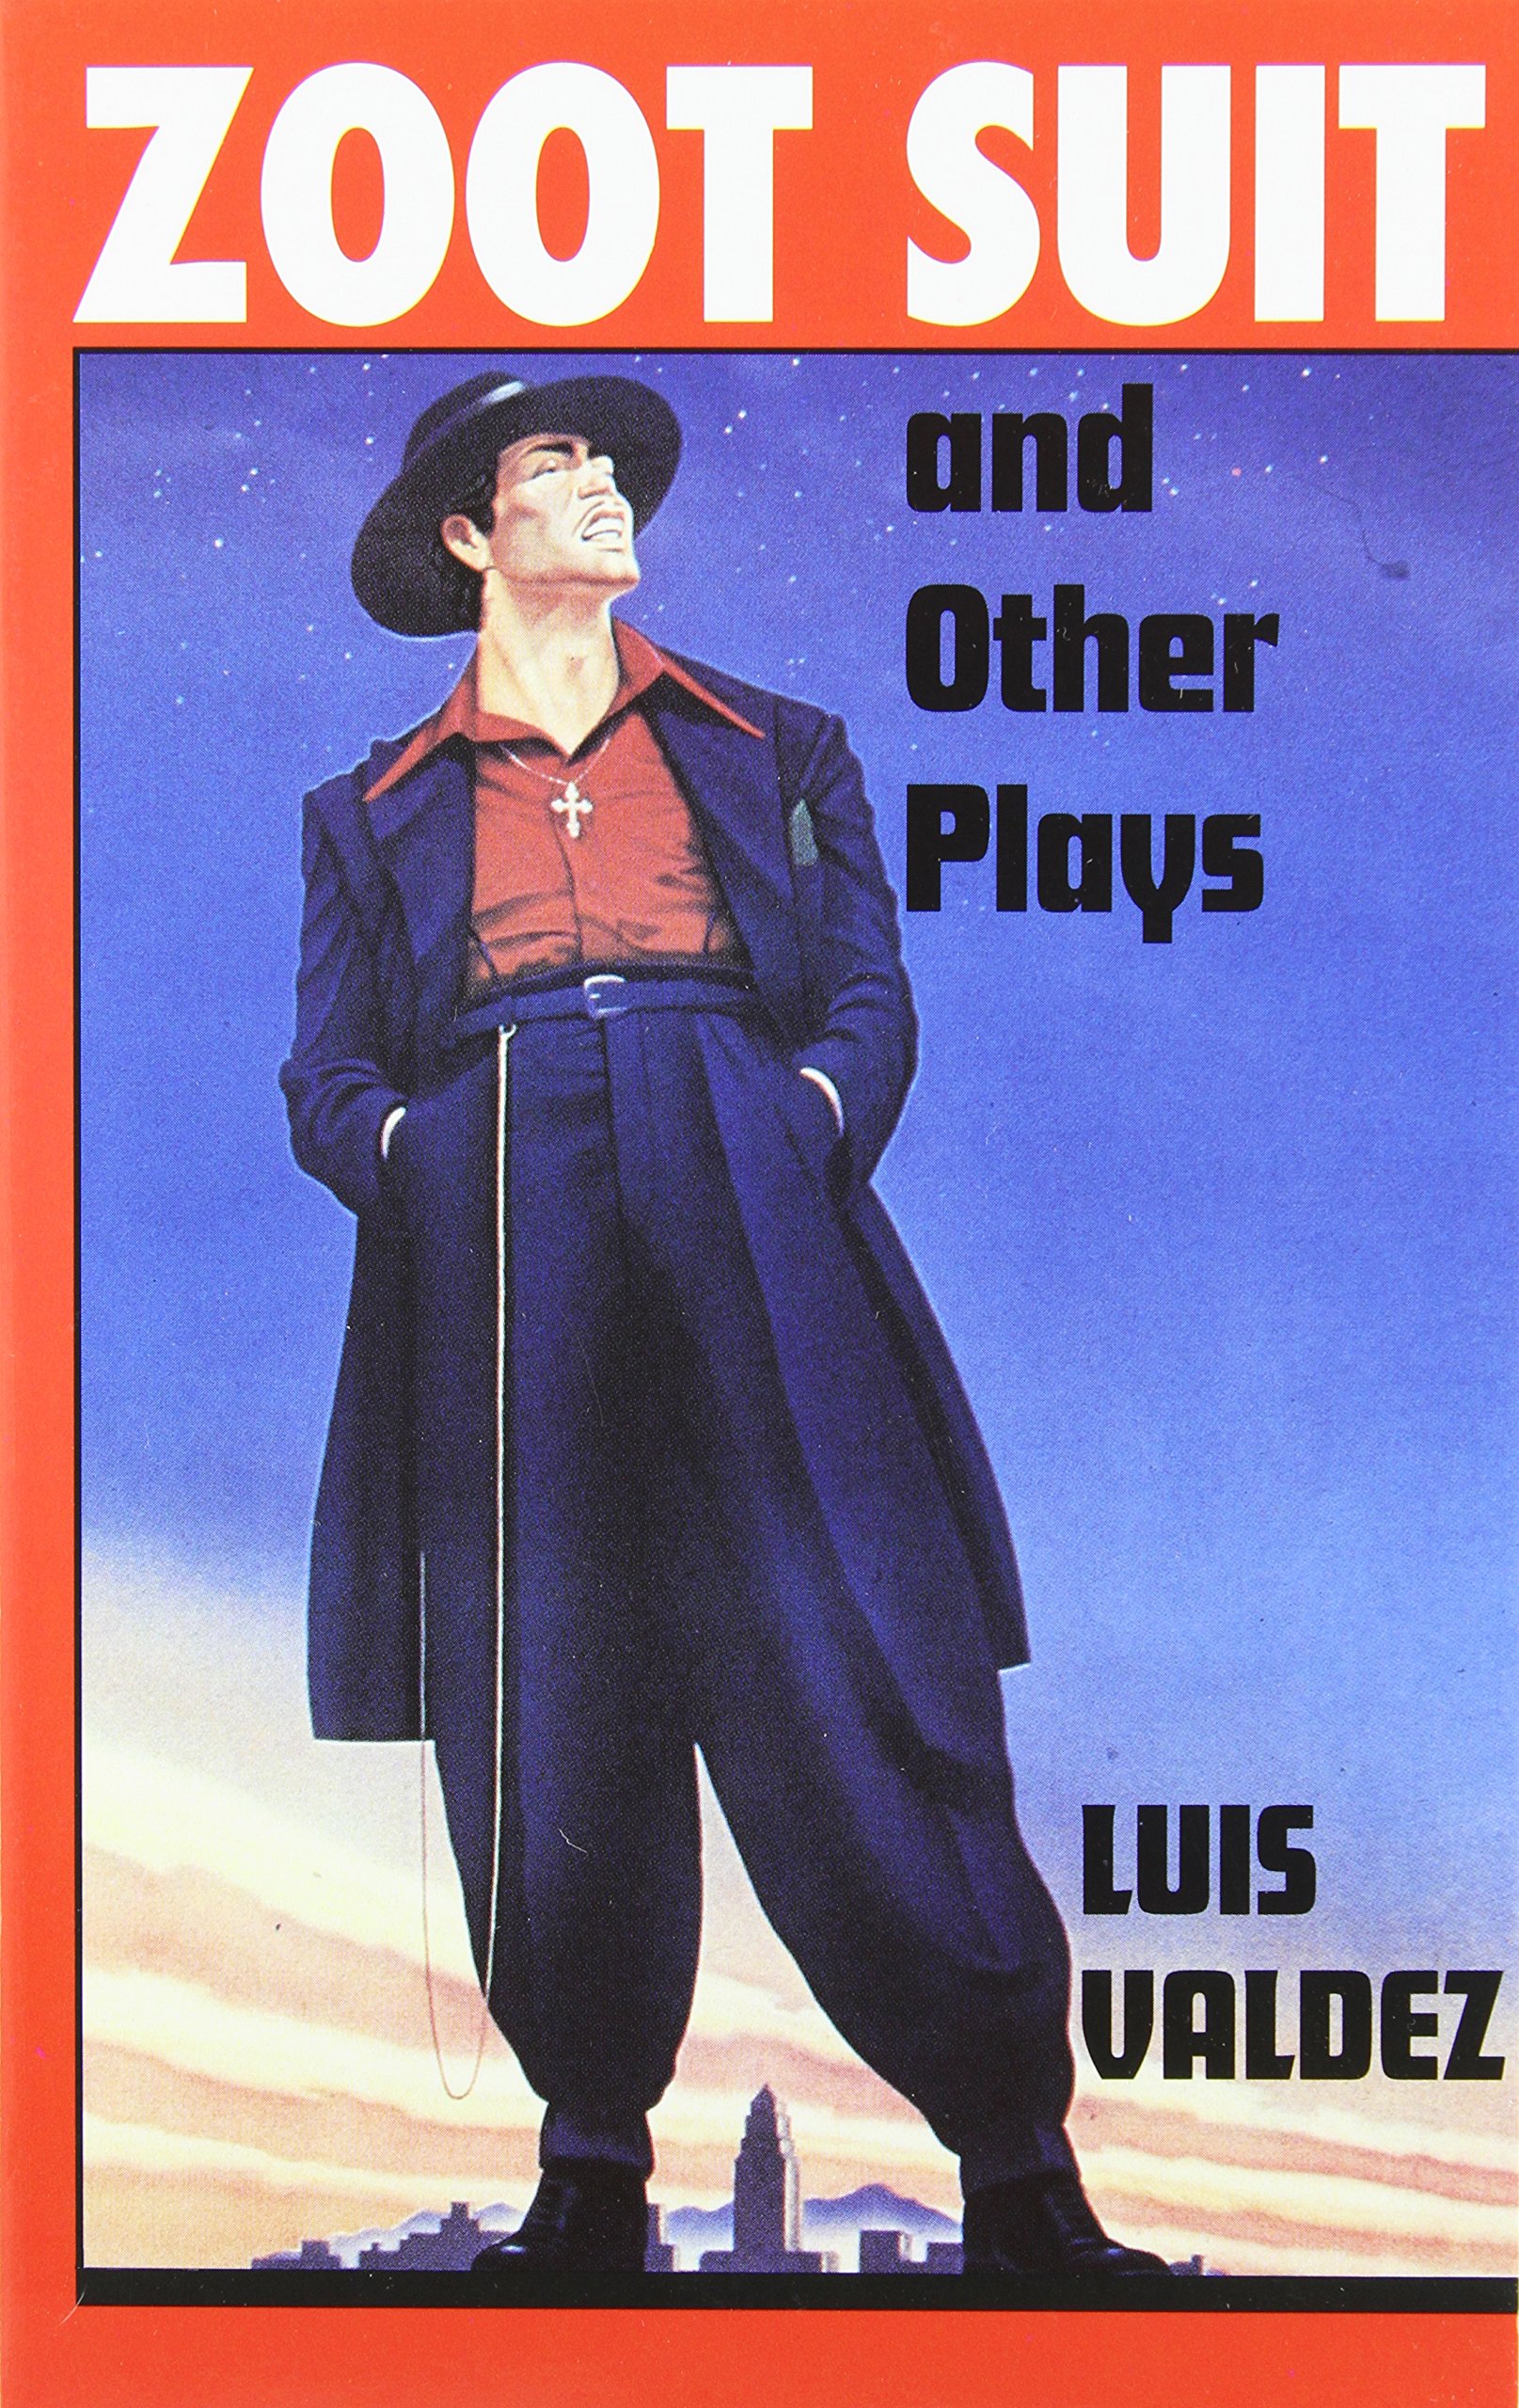 Cover art for "Zoot Suit."